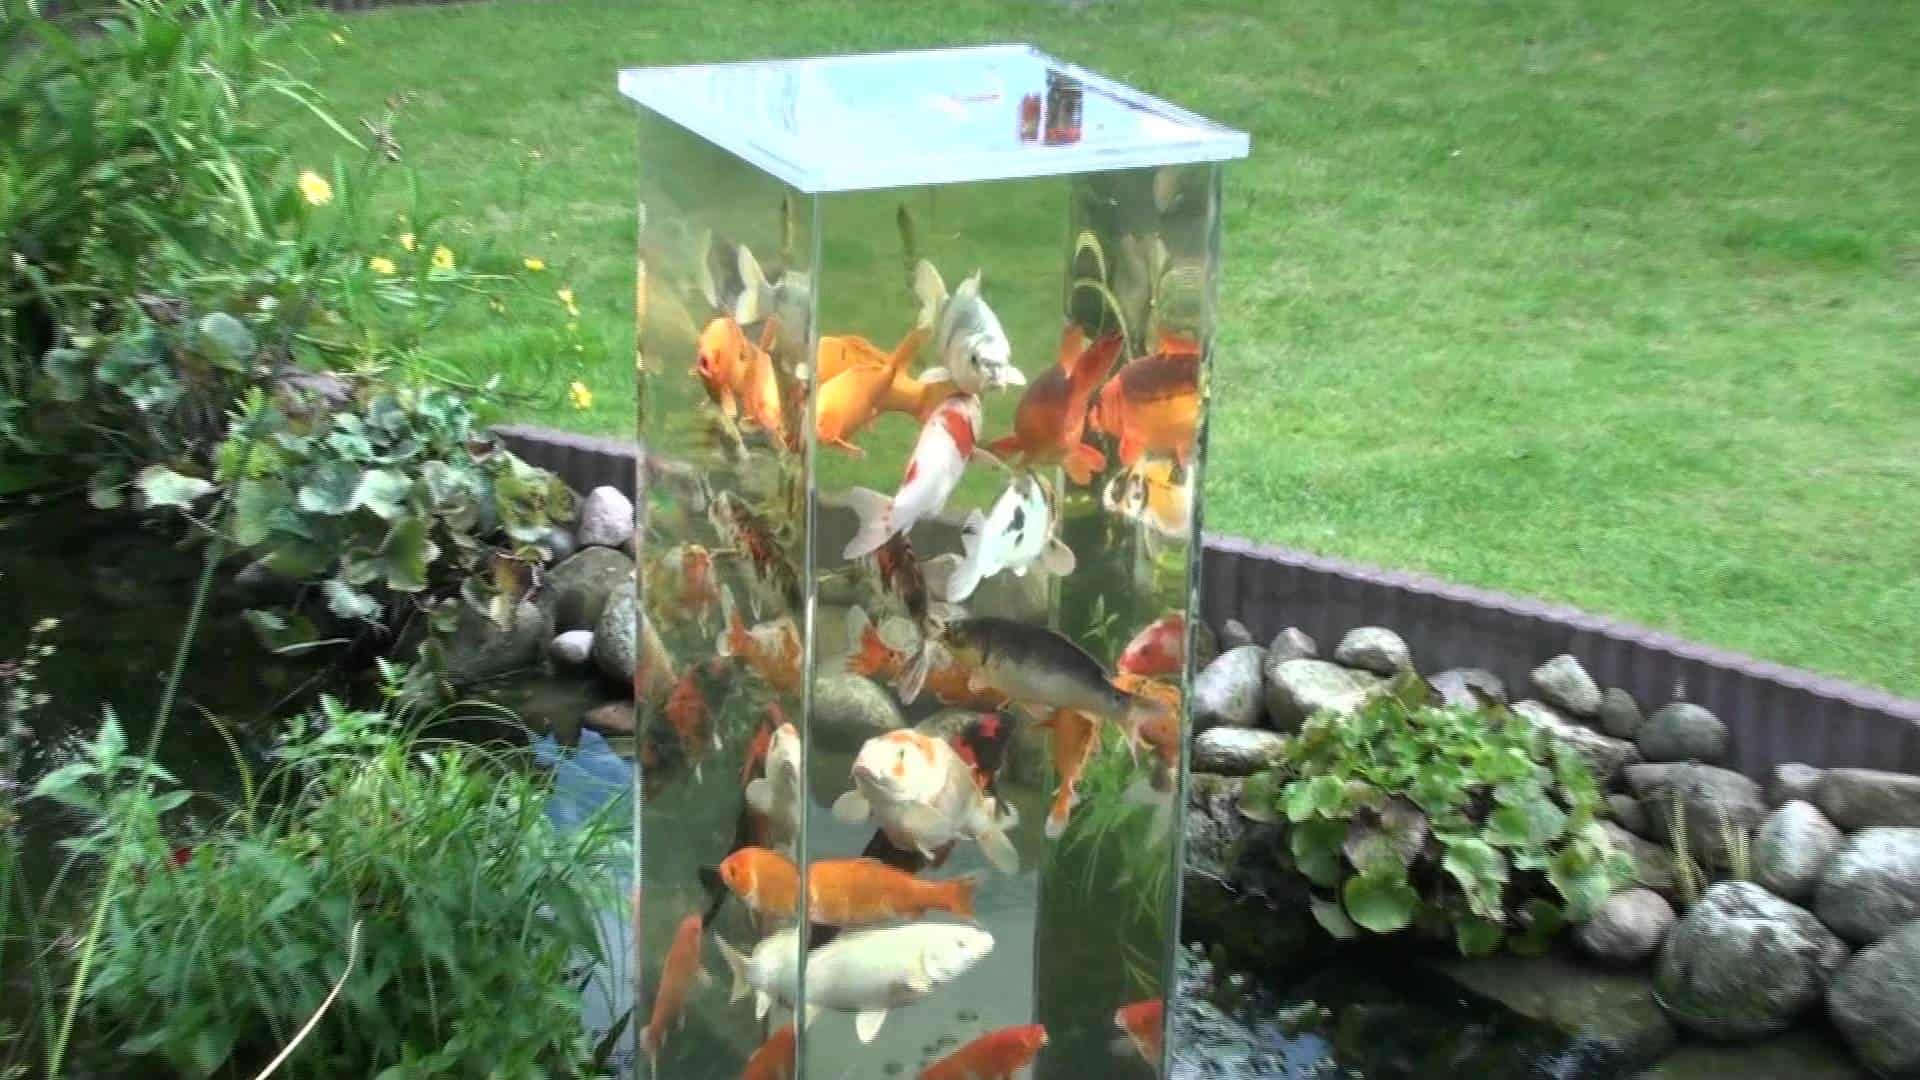 35 Sublime Koi Pond Designs and Water Garden Ideas for ...